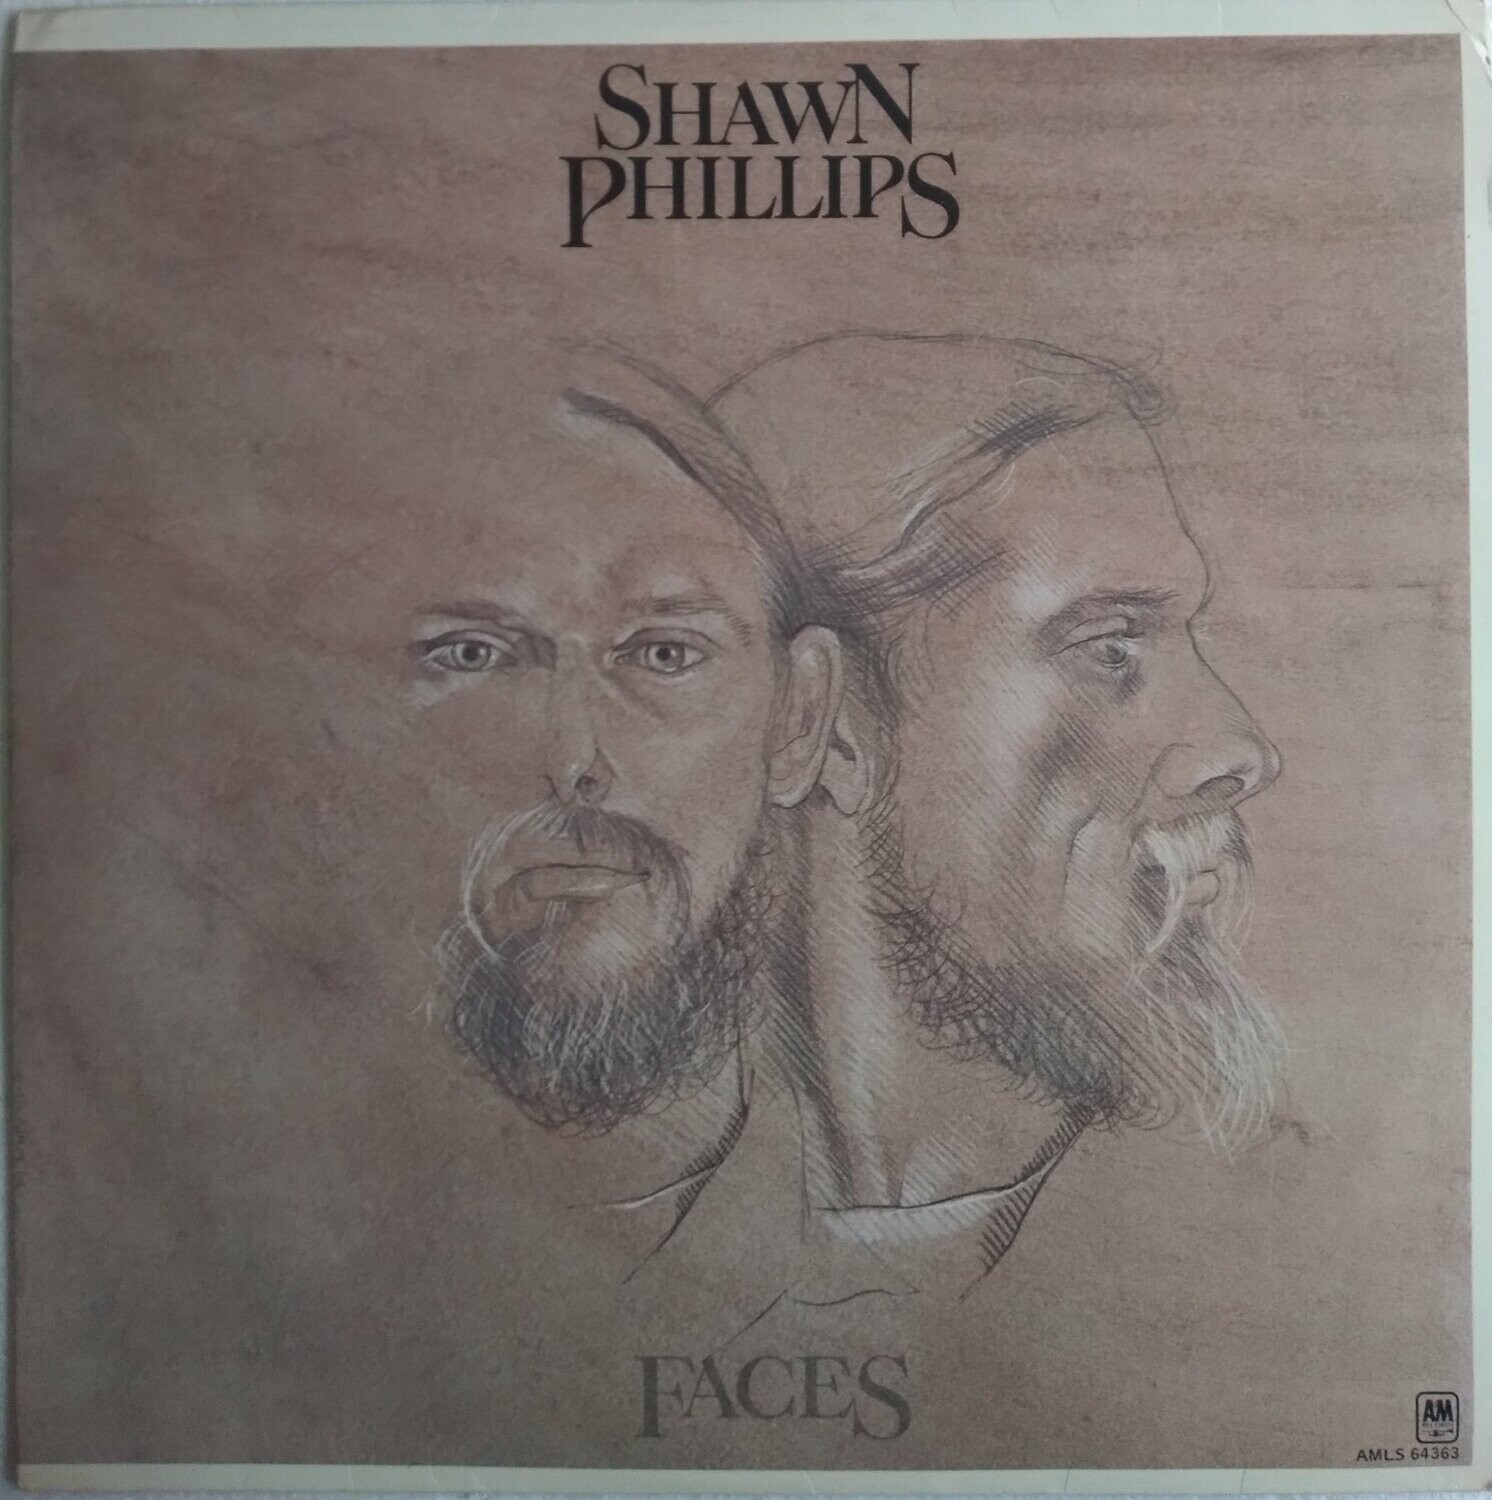 Shawn Phillips ‎– Faces (1972)